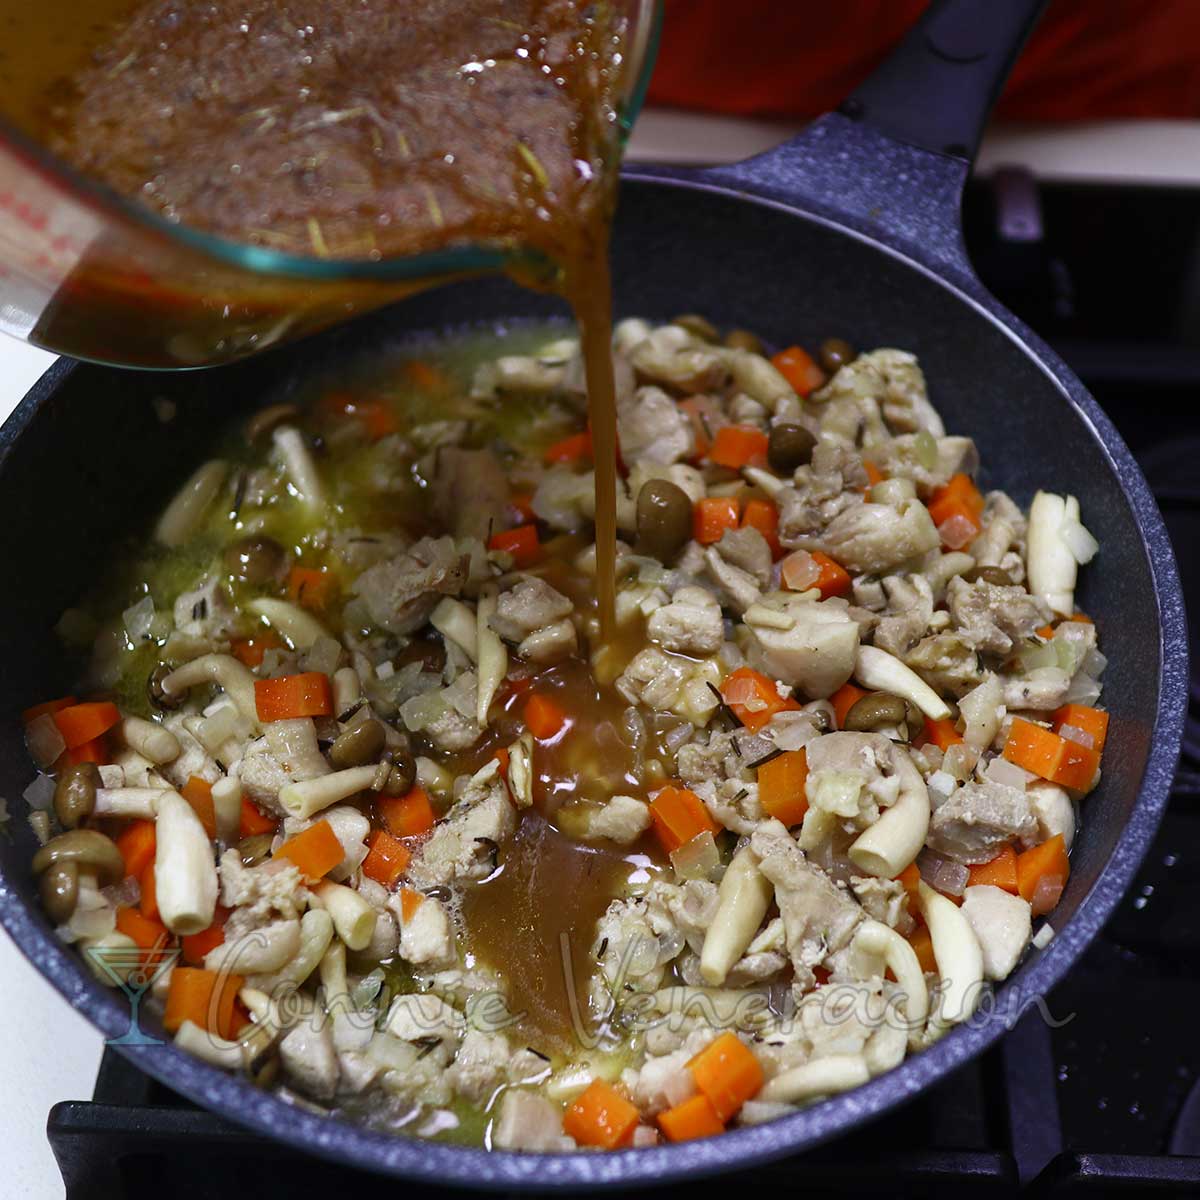 Pouring gravy over chicken, mushrooms and vegetables in pan